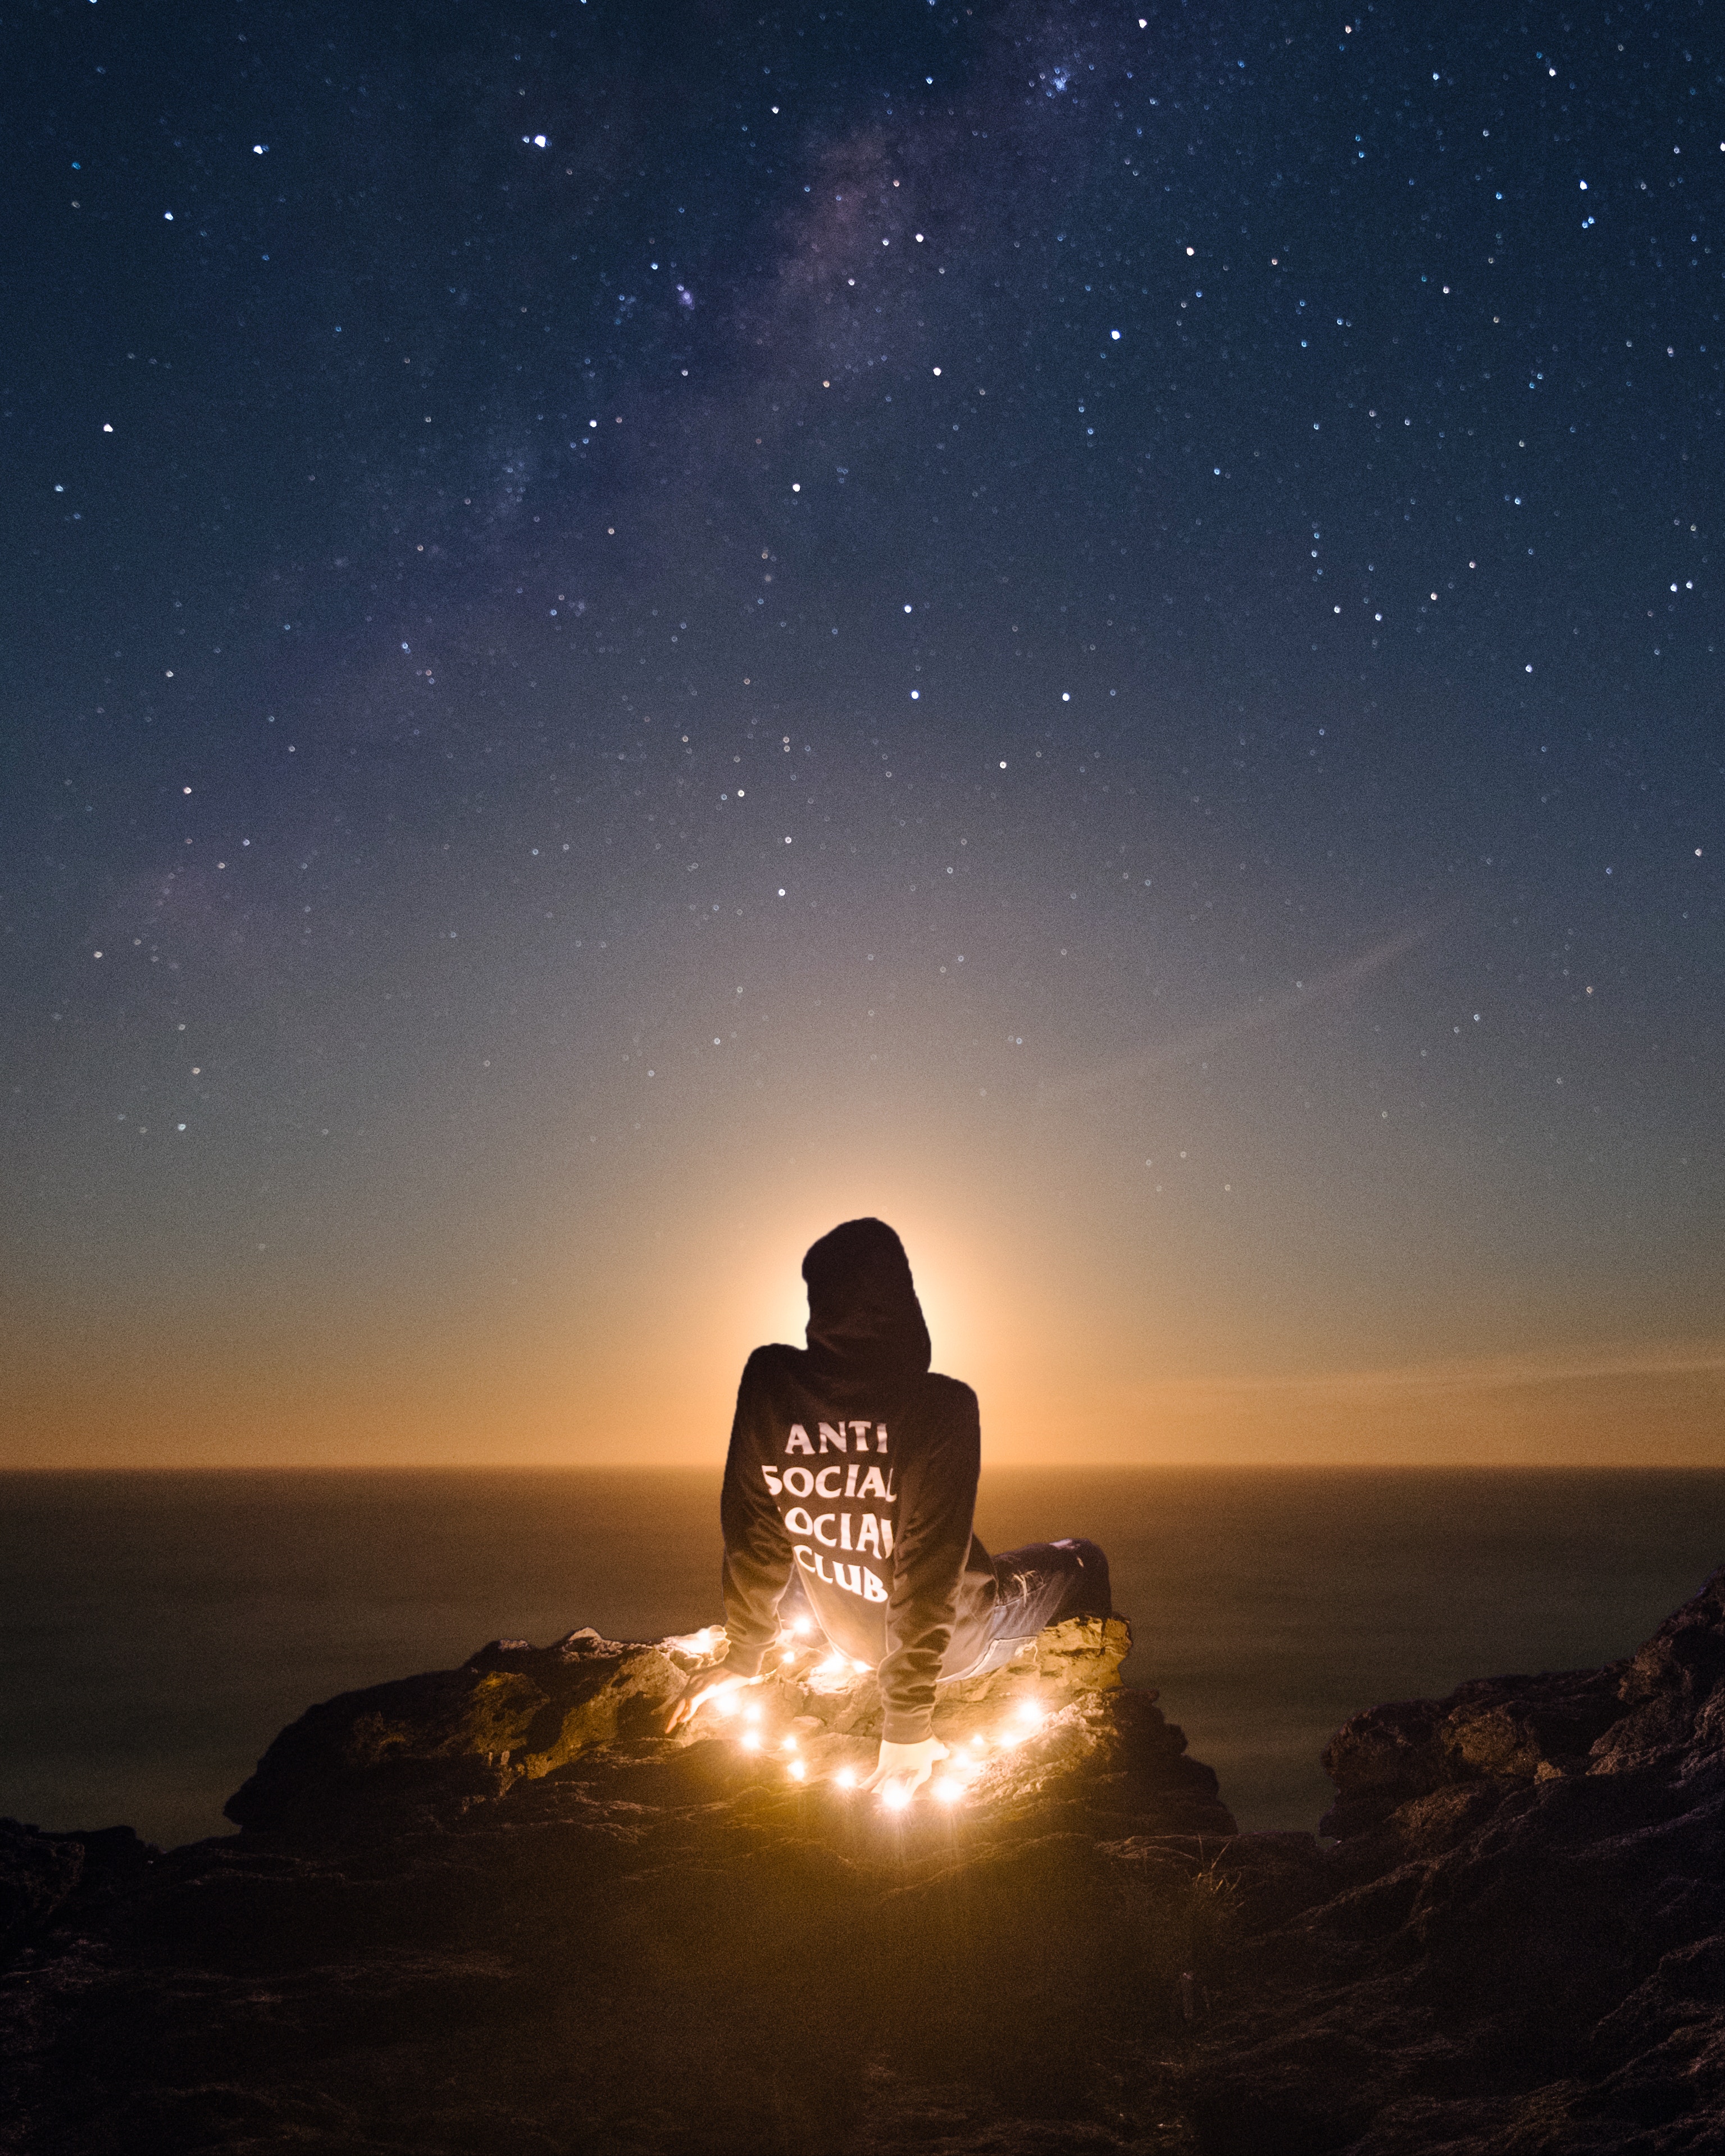 introvert, horizon, dark, privacy, seclusion, starry sky, human, person, loneliness, hill HD for desktop 1080p